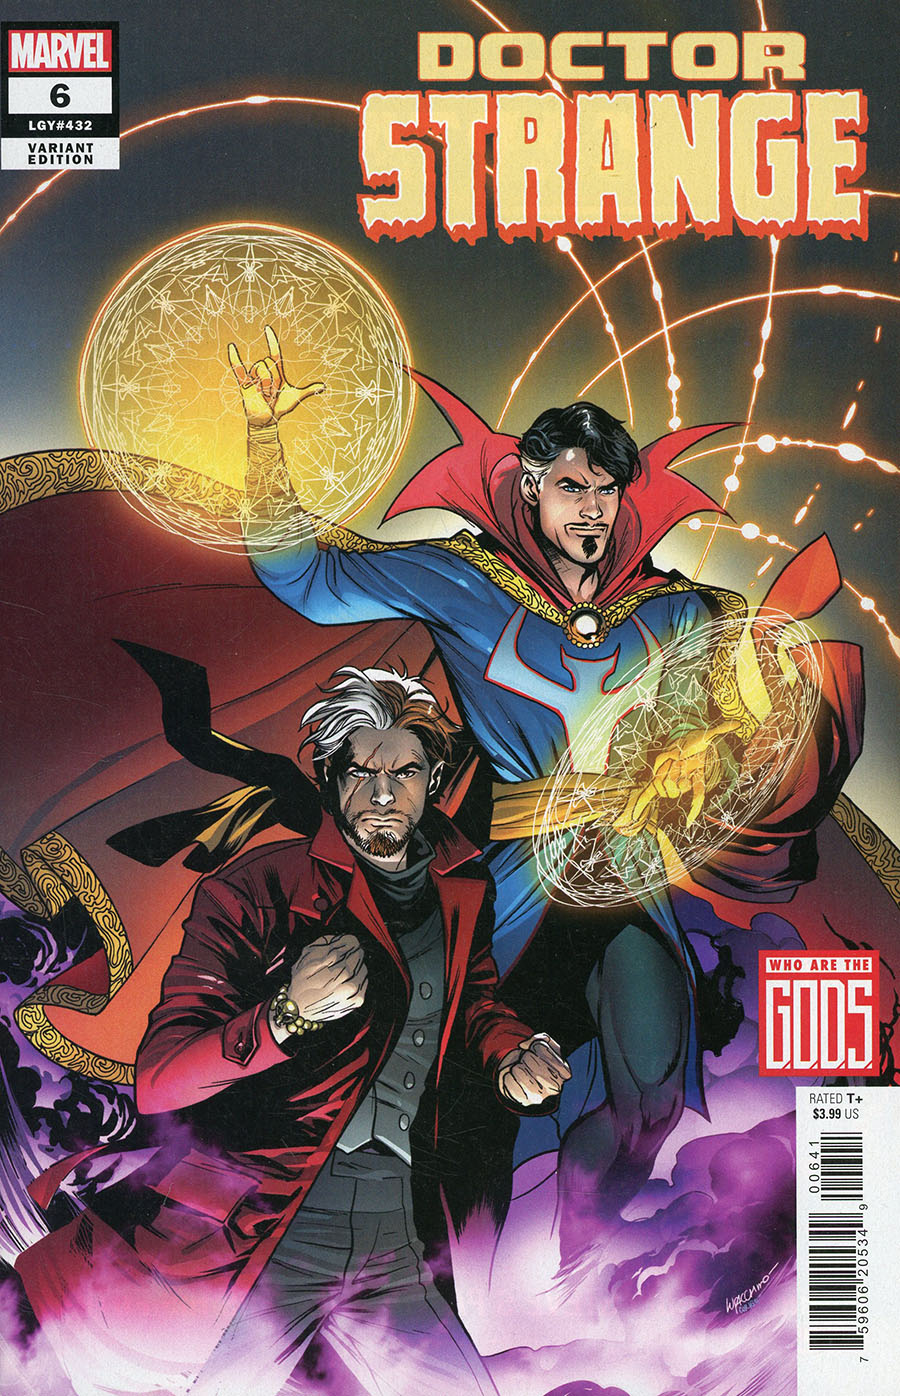 Doctor Strange Vol 6 #6 Cover D Variant Emanuela Lupacchino G.O.D.S. Cover (G.O.D.S. Tie-In)